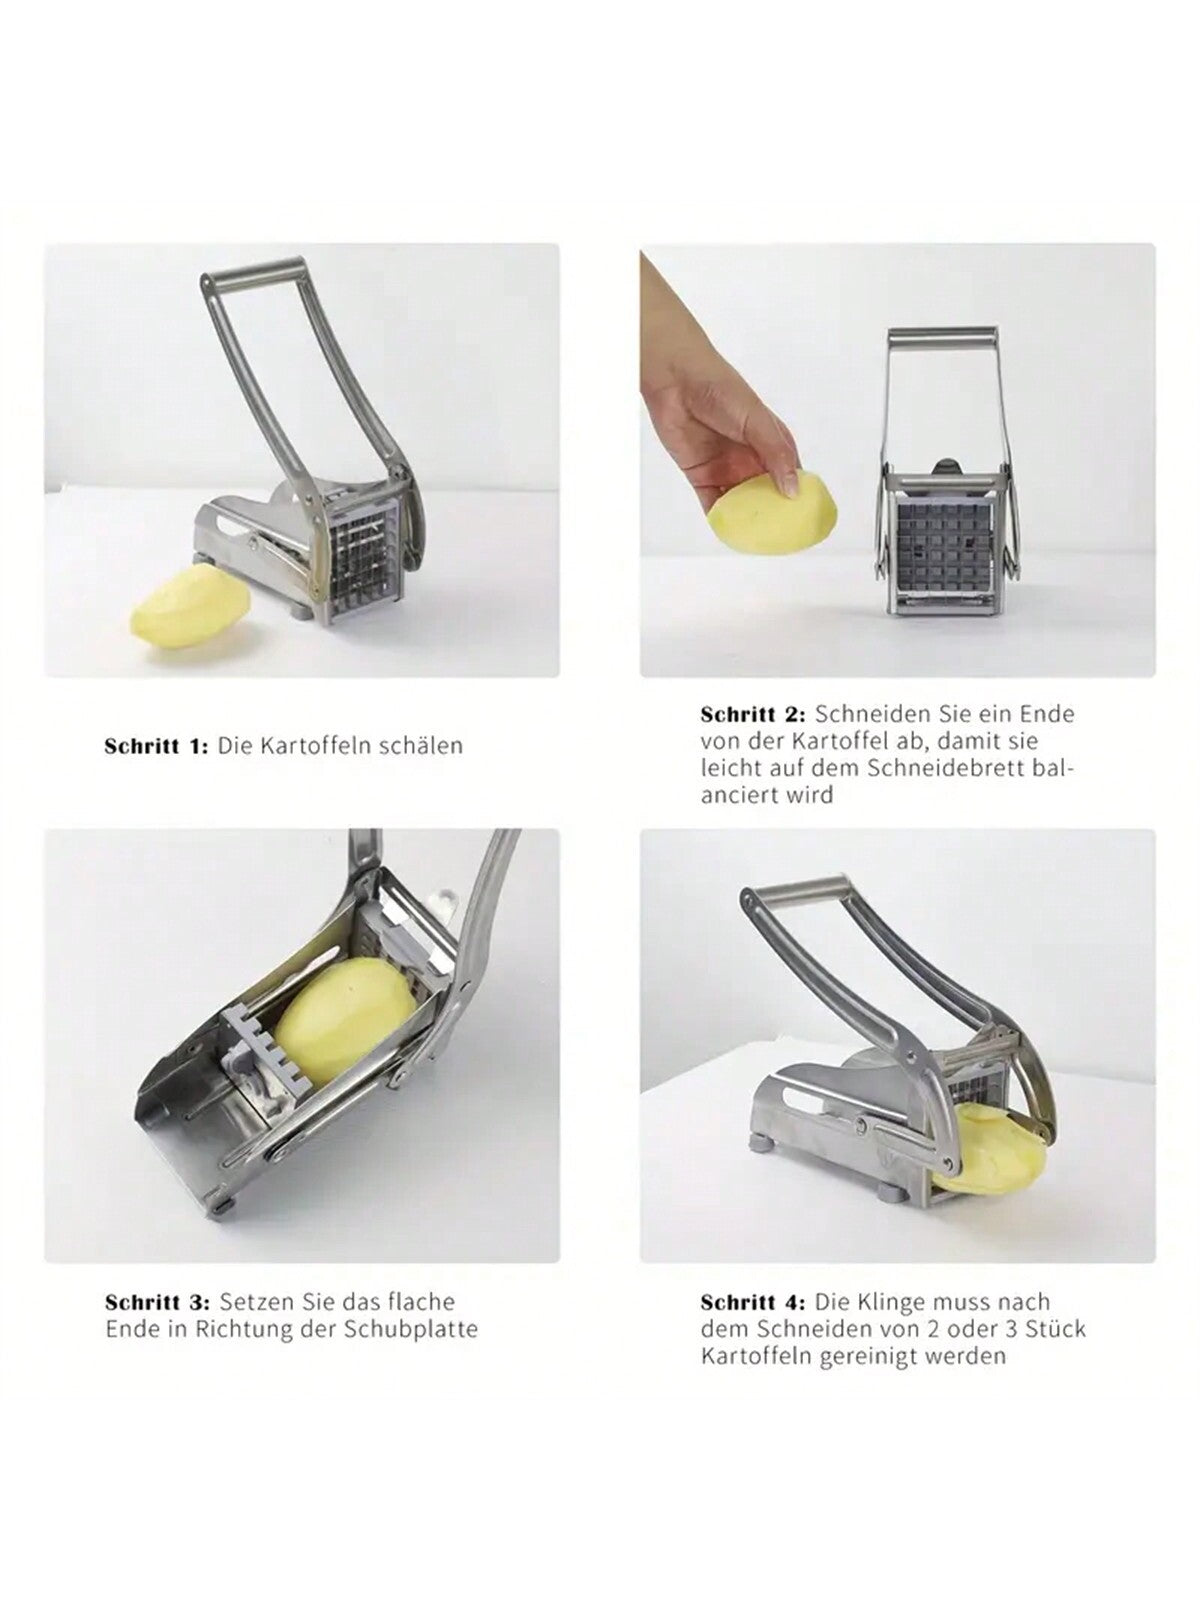 1pc Stainless Steel Potato Cutter